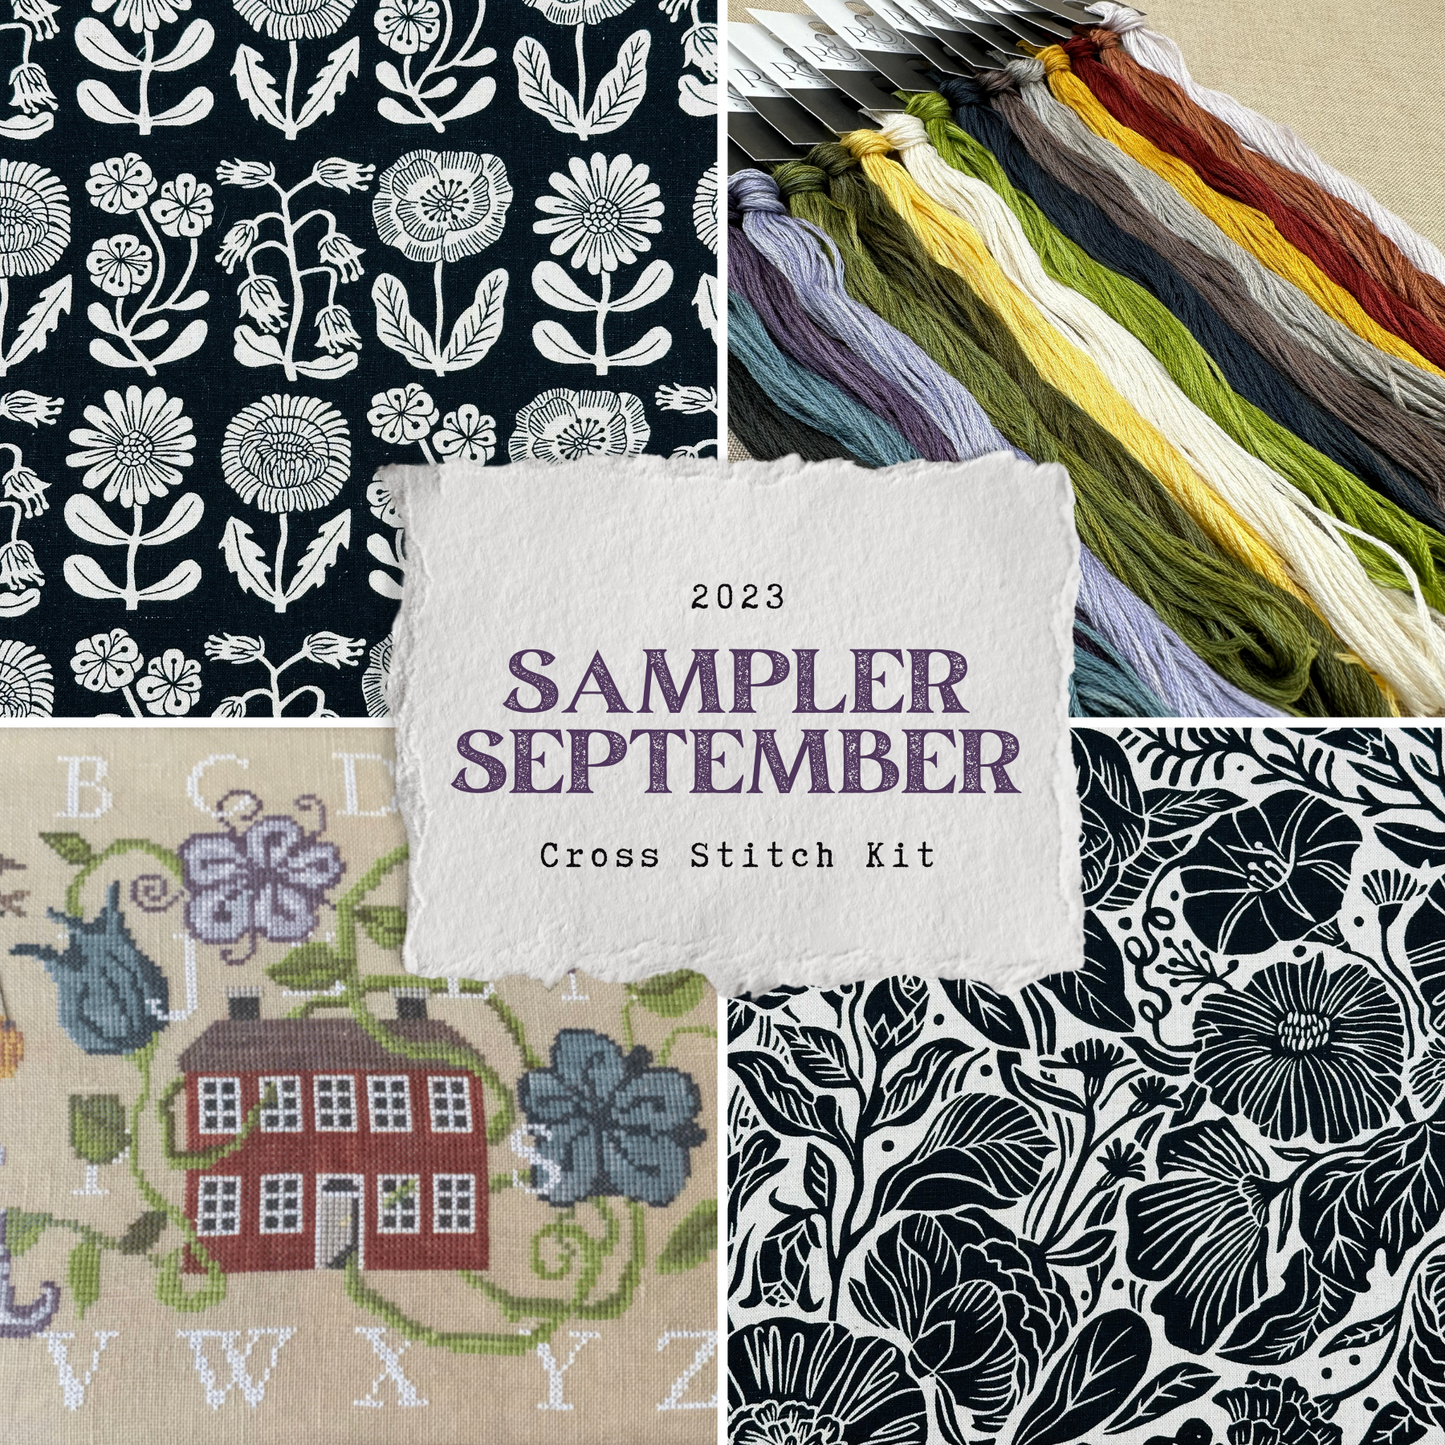 Maximum Cross Stitch, Evertote, Roxy Floss Co, and Timber Yarns - Sampler September 2023 Cross Stitch Kit with Black Project Bag Set